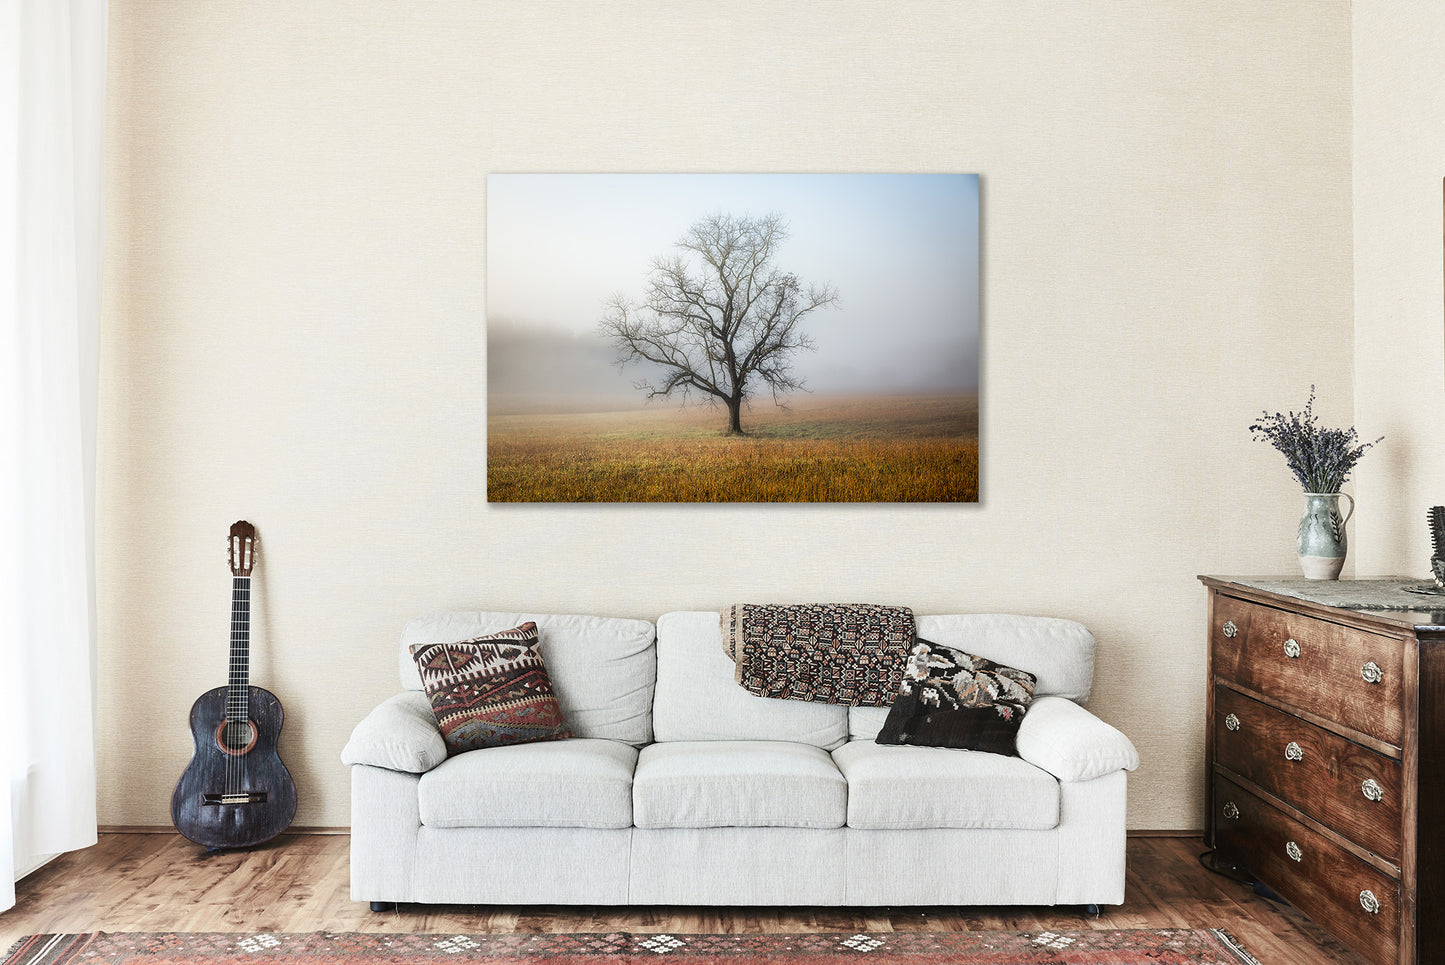 Nature Print on Metal - Minimalism Wall Art of Lone Tree on Foggy Morning in Great Smoky Mountains Tennessee - Landscape Photo Decor